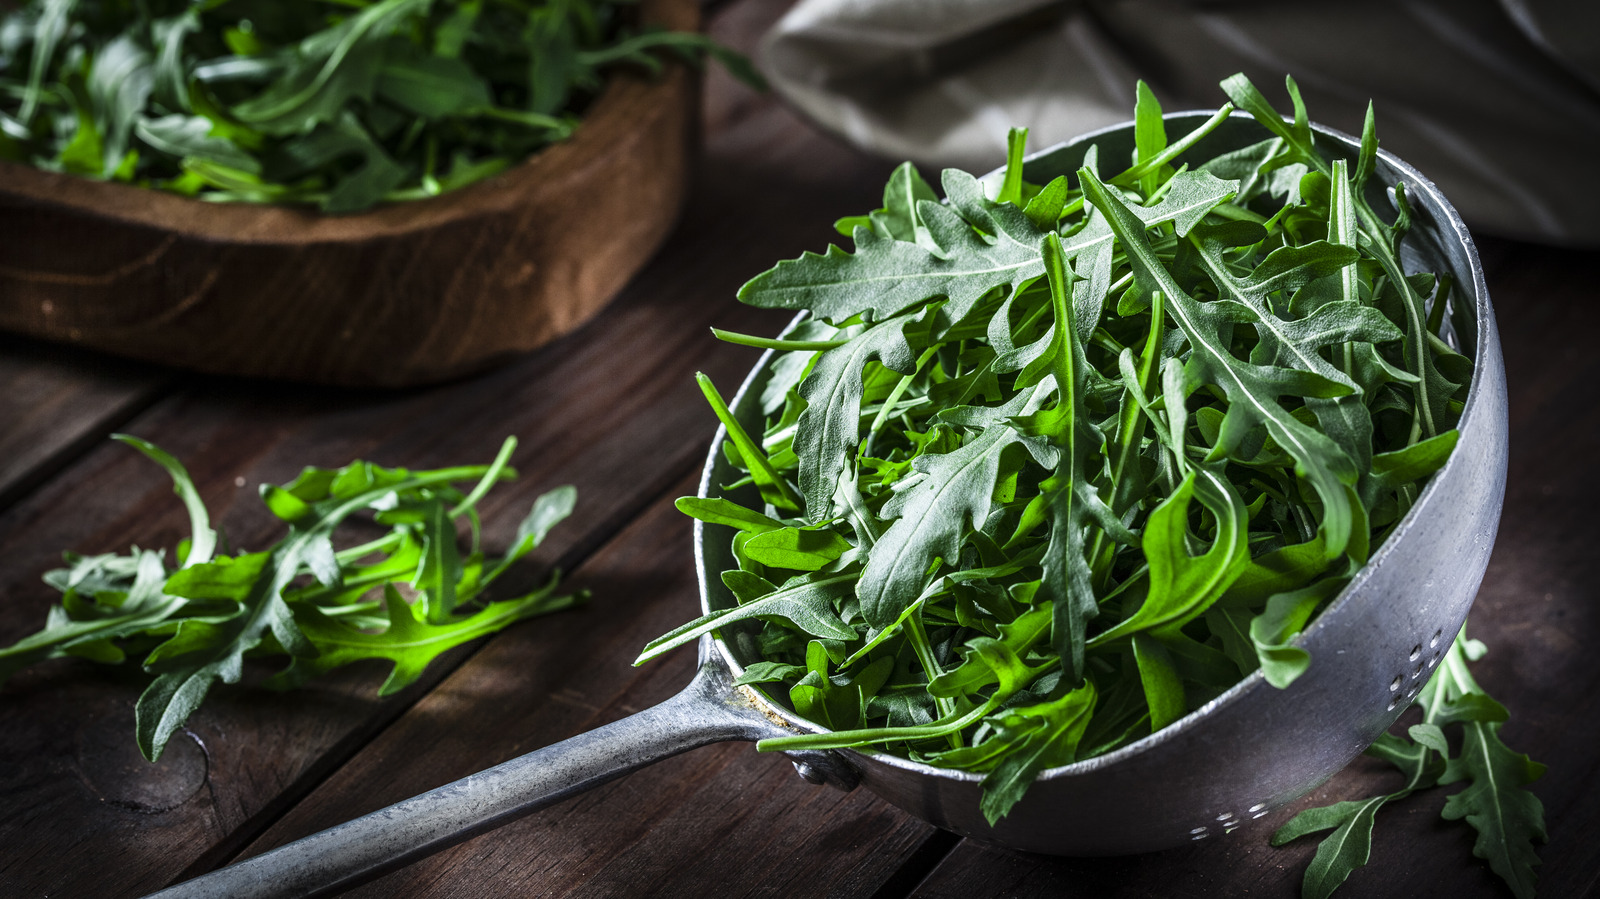 Leftover arugula is the perfect addition to homemade soup